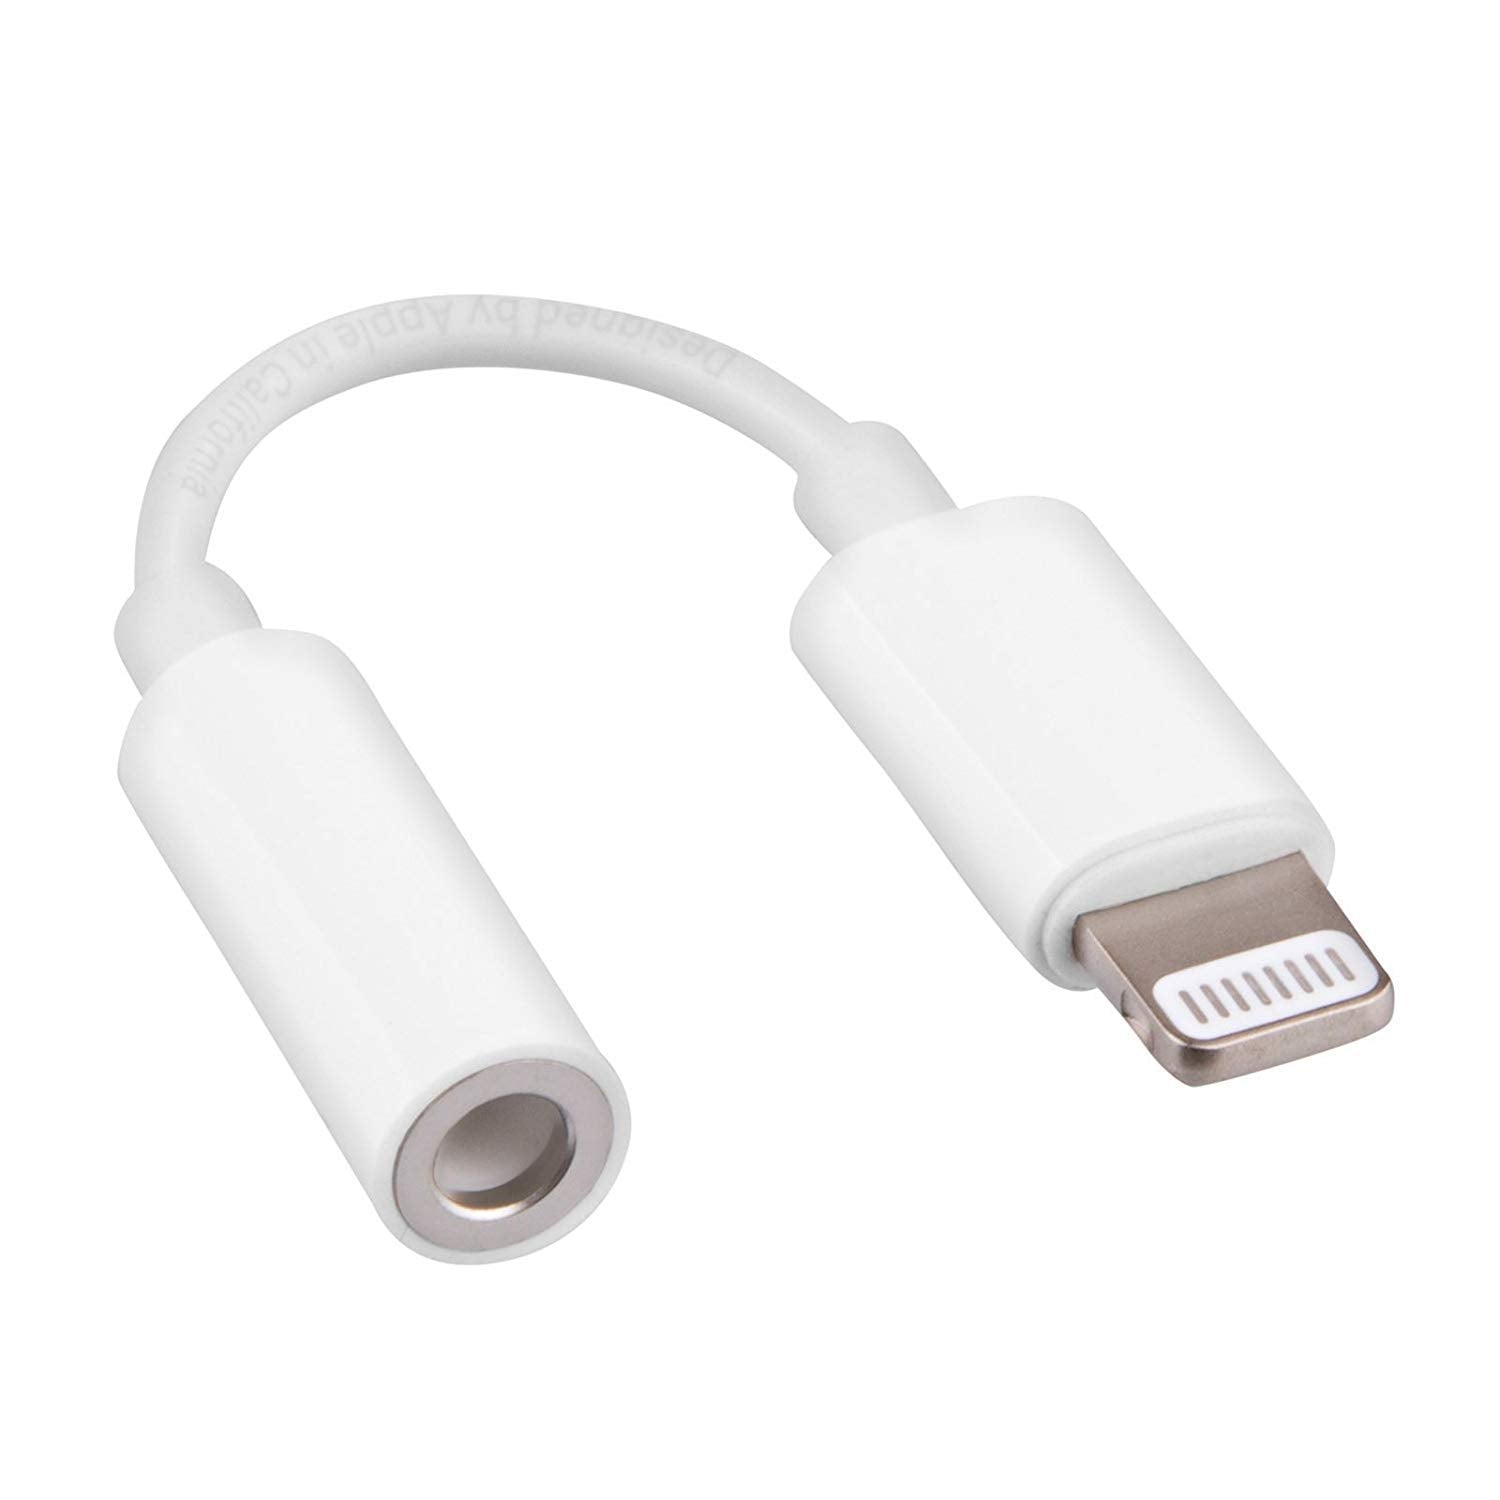 Apple iPhone SE Heaphone Jack Connector (Lightning to 3.5mm)